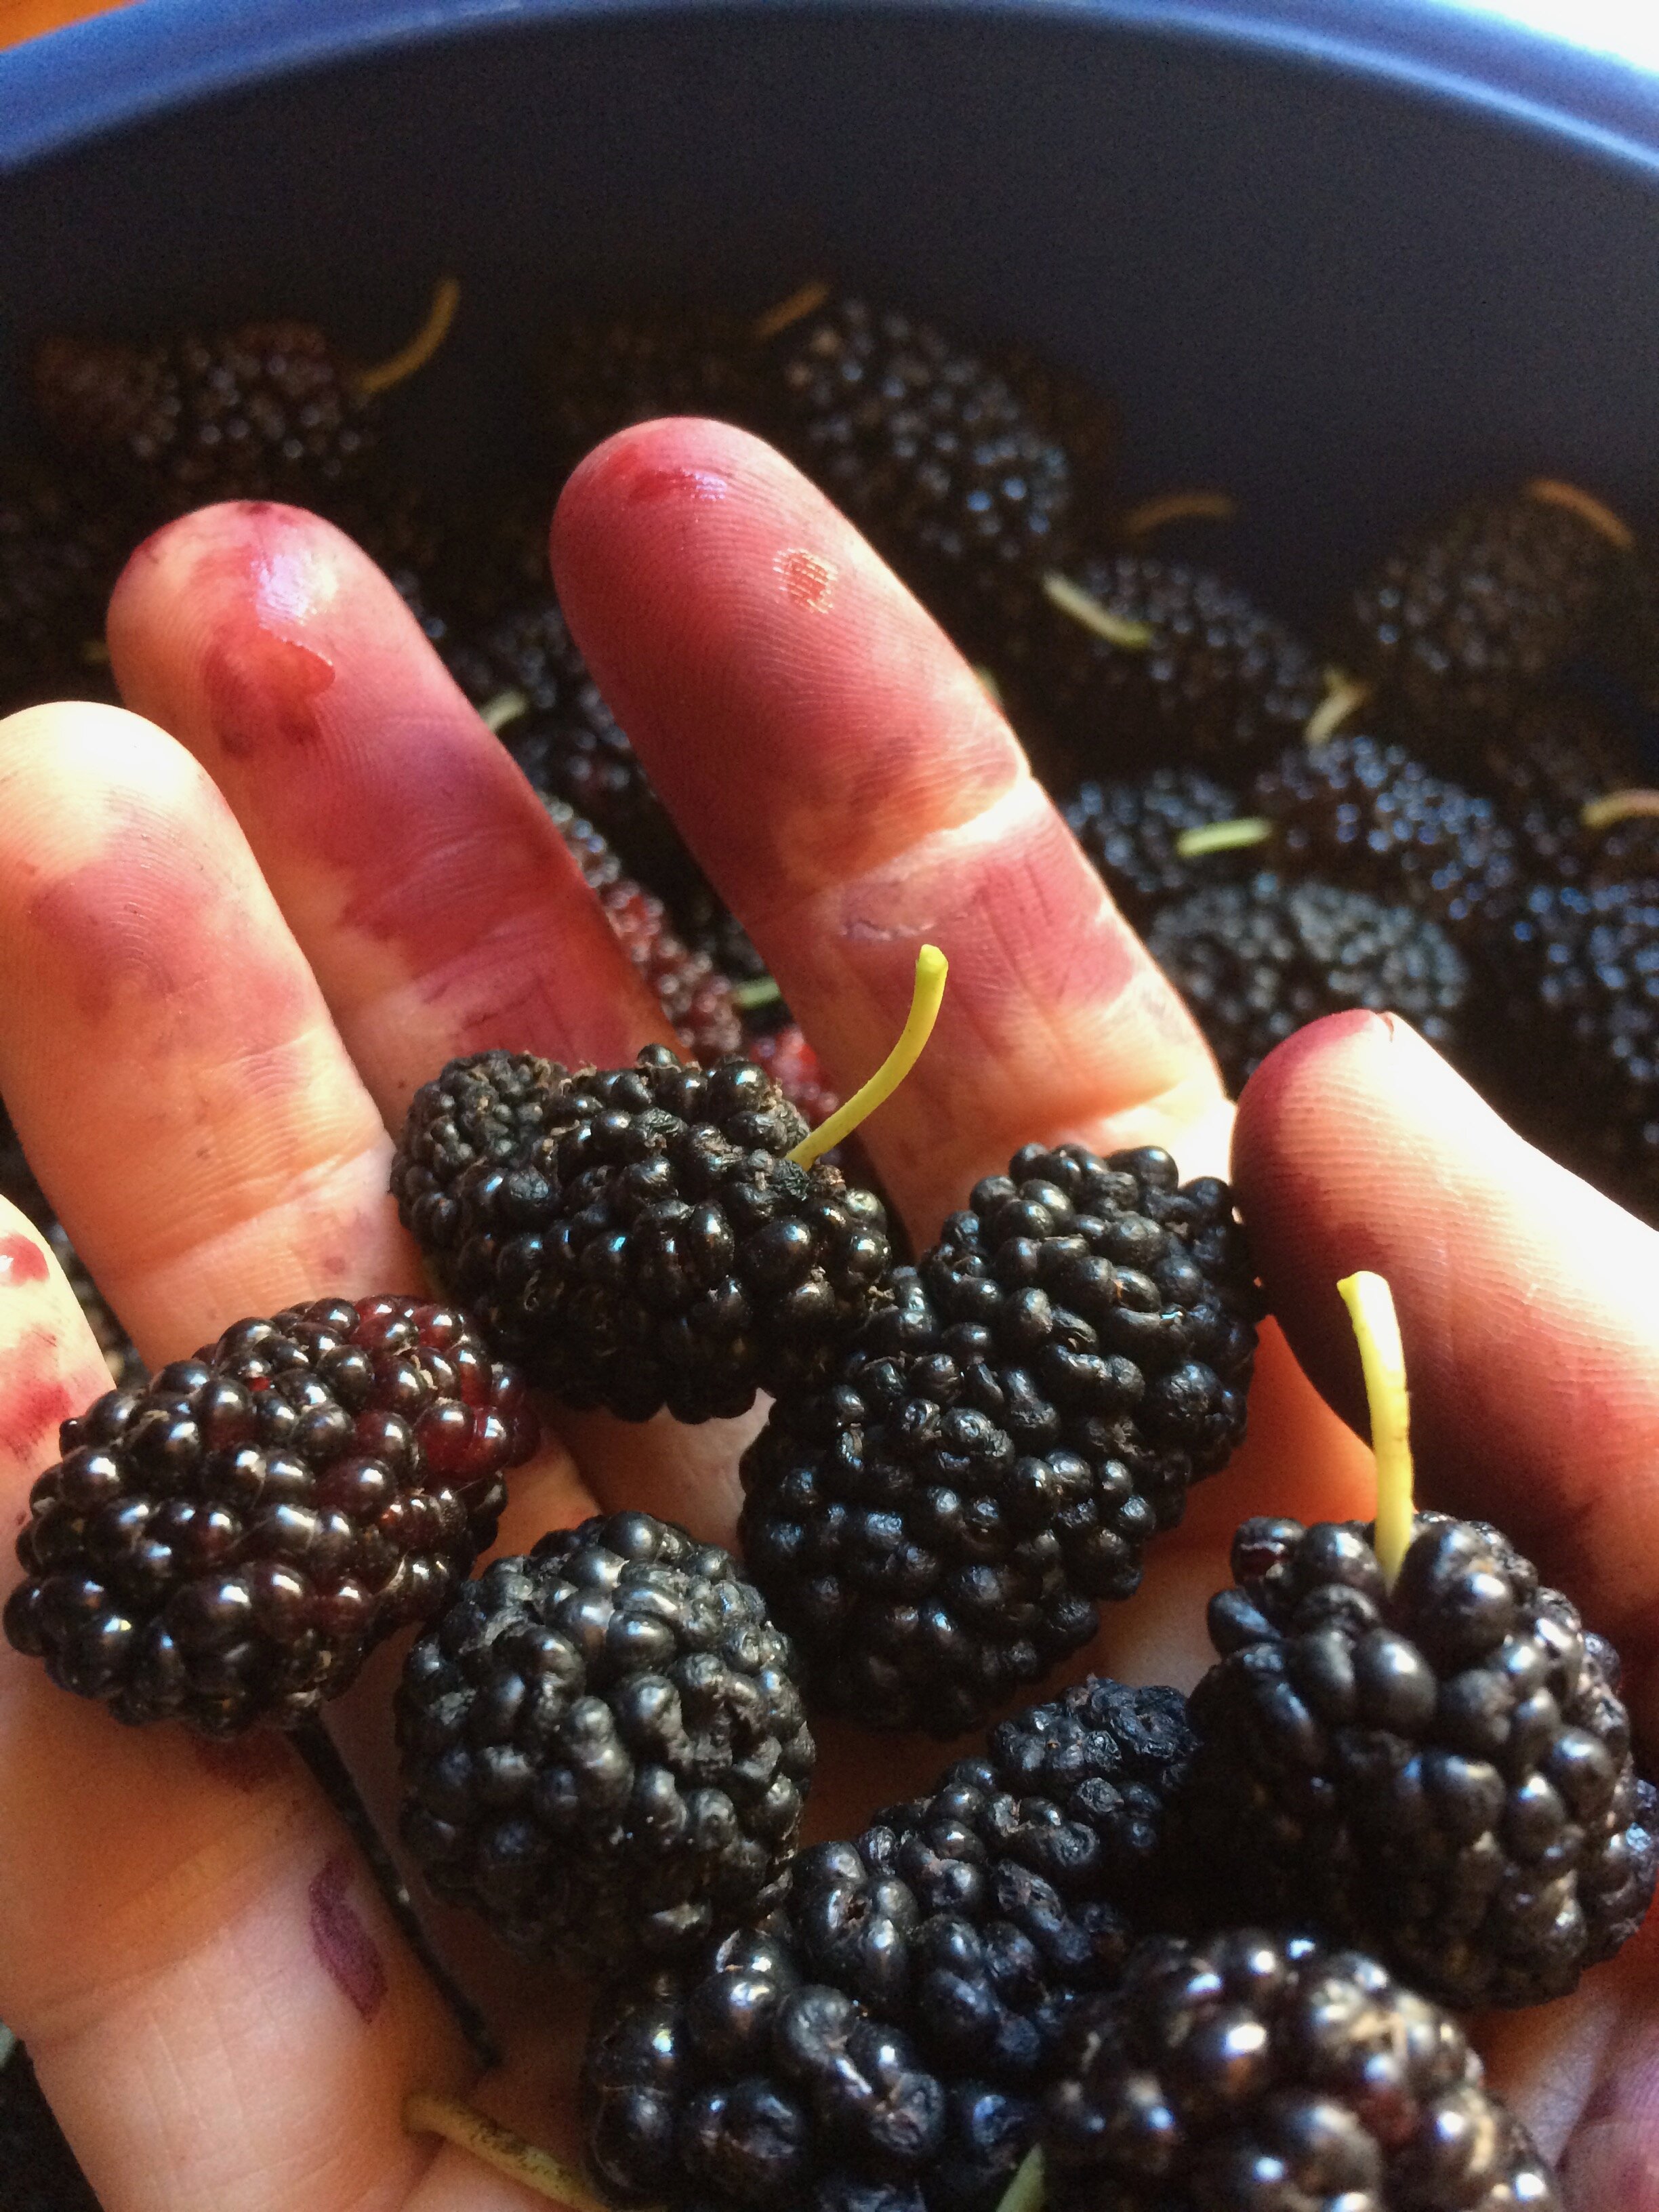 Hand with stained fingers holding mulberries